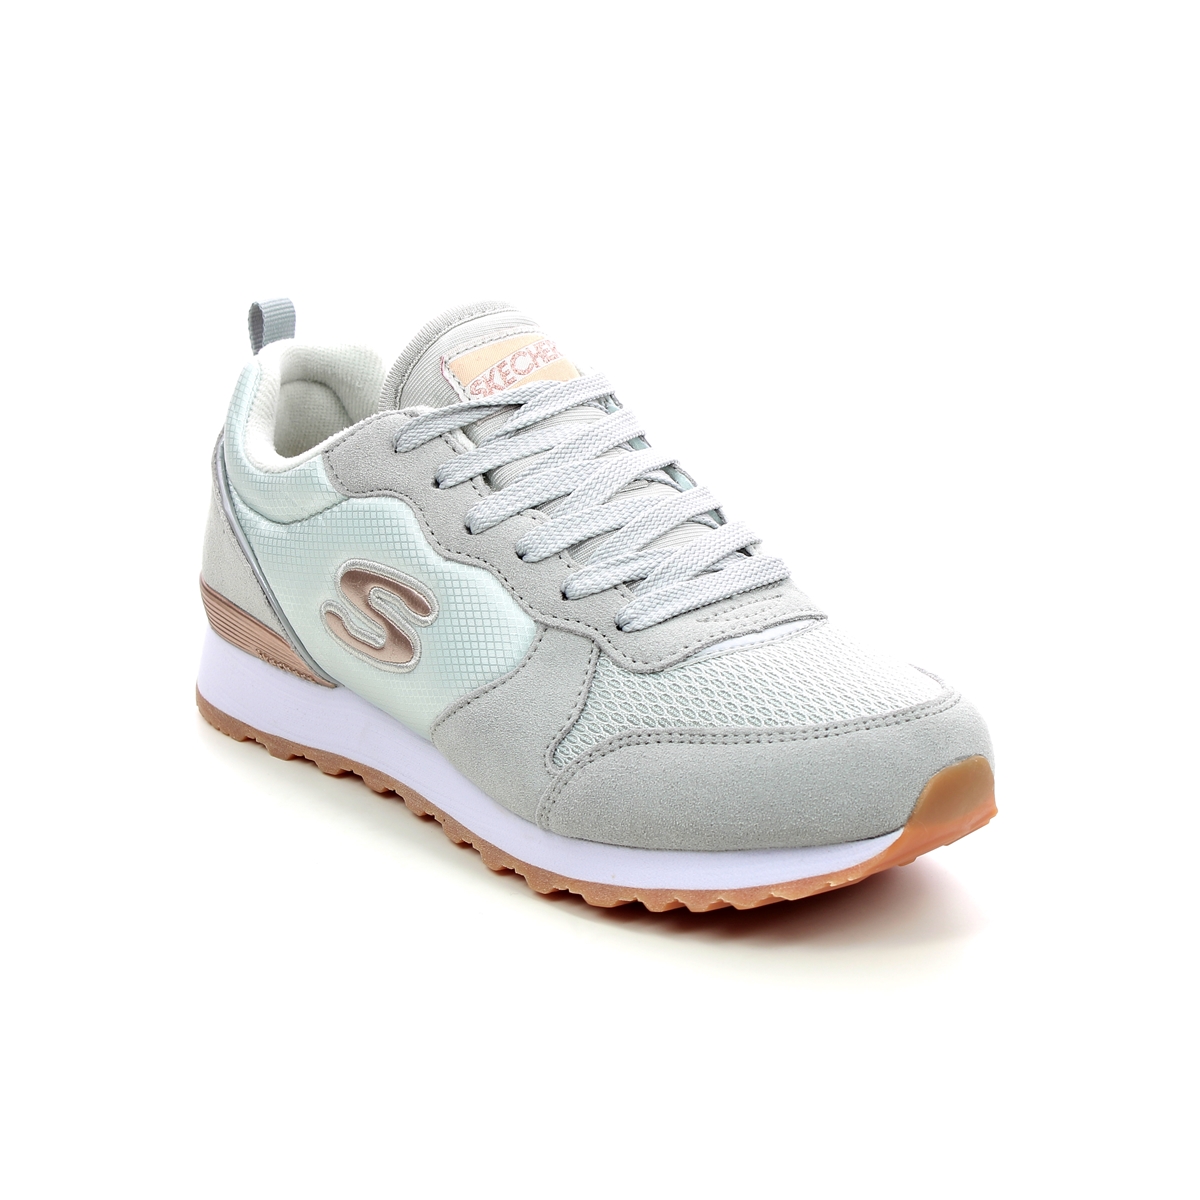 Skechers Og 85 Gold Gurl LTGY Light grey Womens trainers 111 in a Plain Leather and Textile in Size 8